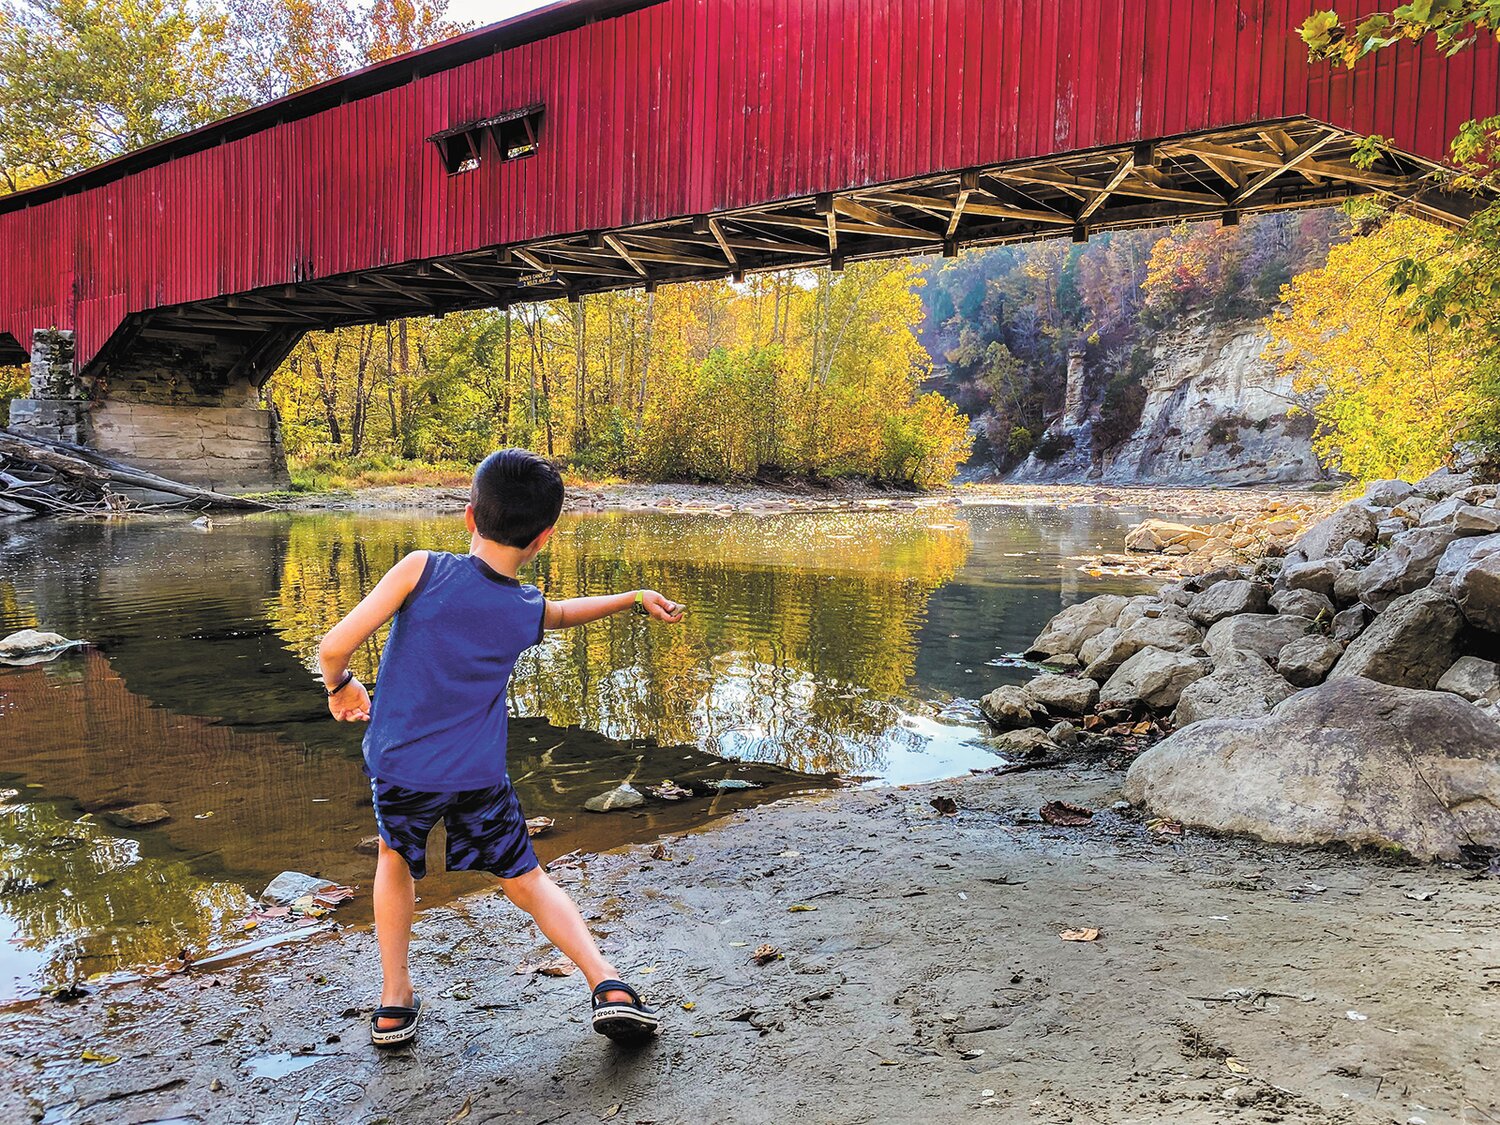 This photo by Will Bernhardt was taken at Deer's Mill Covered Bridge near Shades State Park on a beautiful fall day.